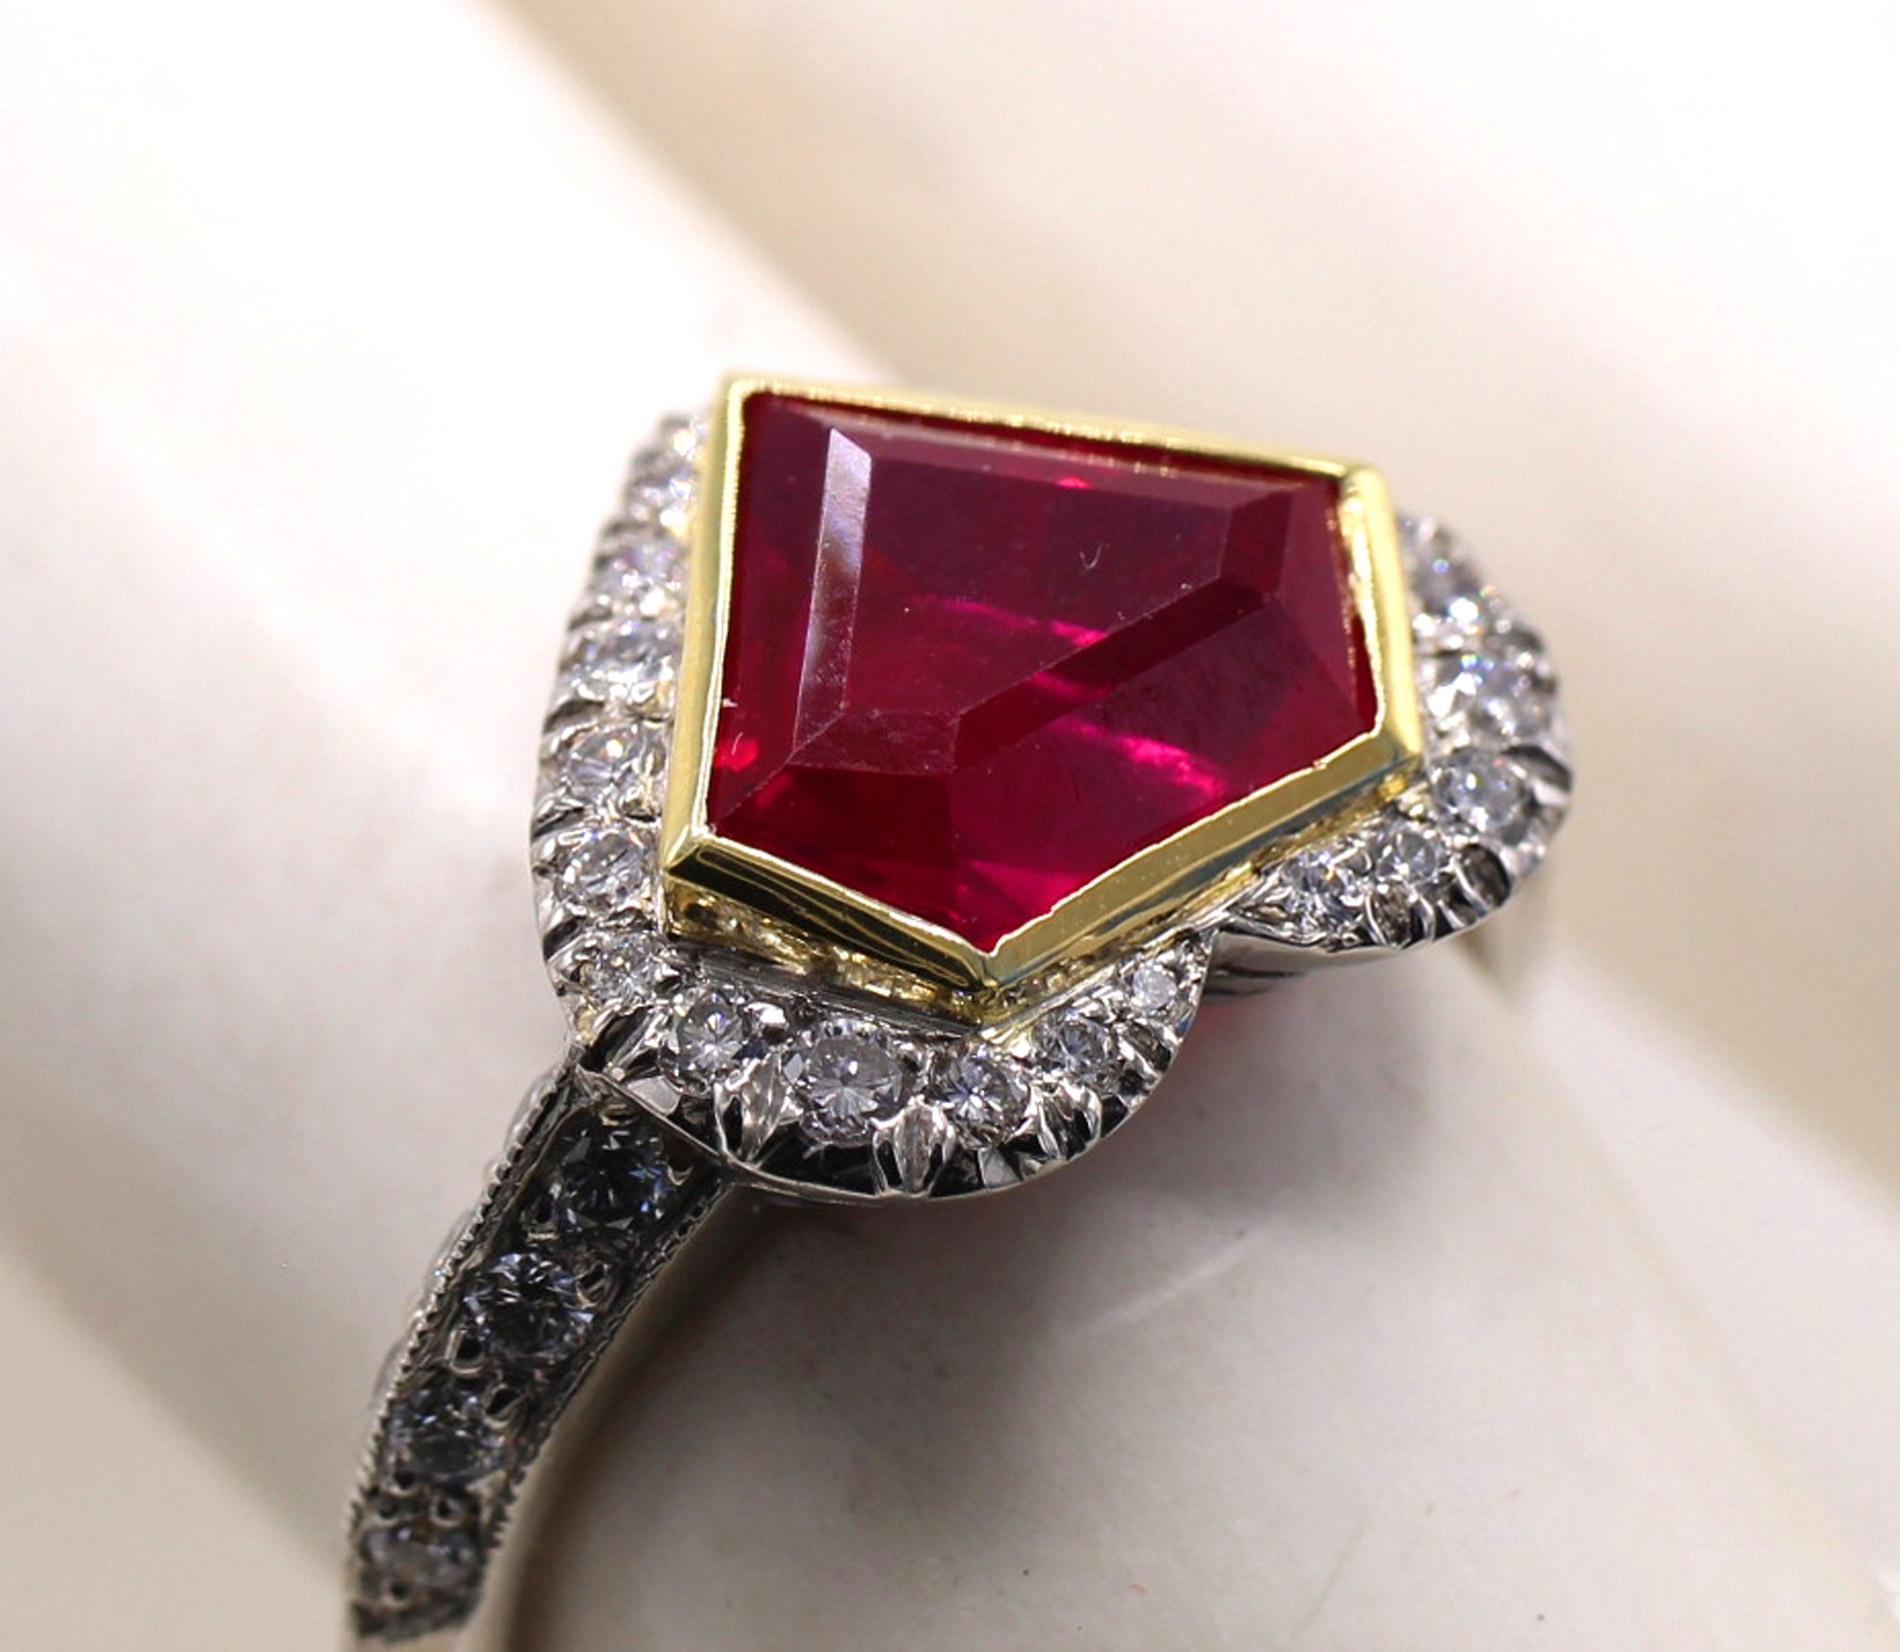 Uniquely designed for a unique gem stone, this beautiful and masterfully handcrafted ring has the outline of a heart shape with and inner yellow gold bezel in the shape of a shield or diamond. The center piece is  a pigeon blood red beautiful Burma